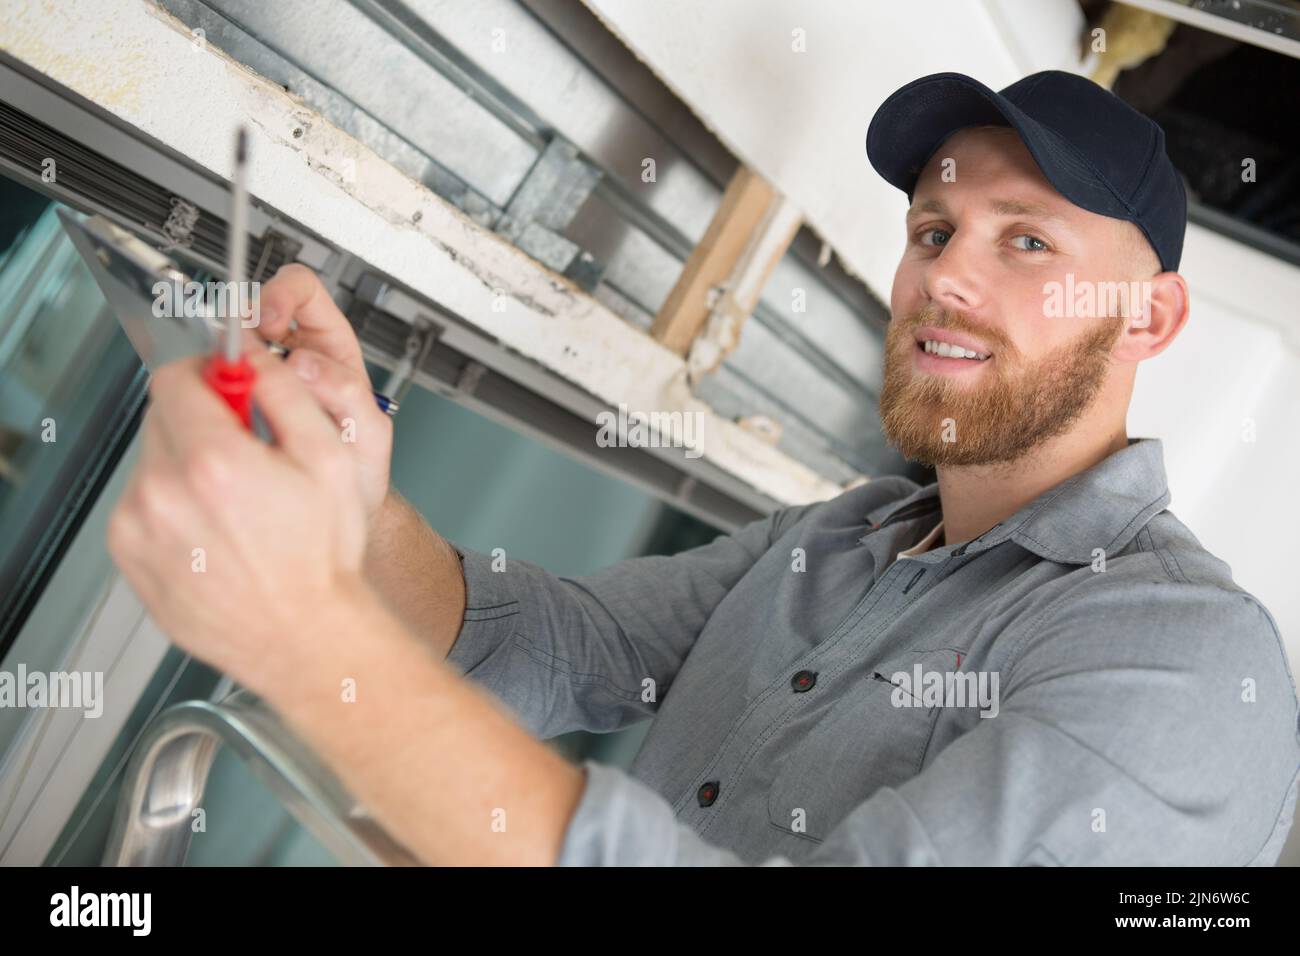 construction worker during replacement window Stock Photo